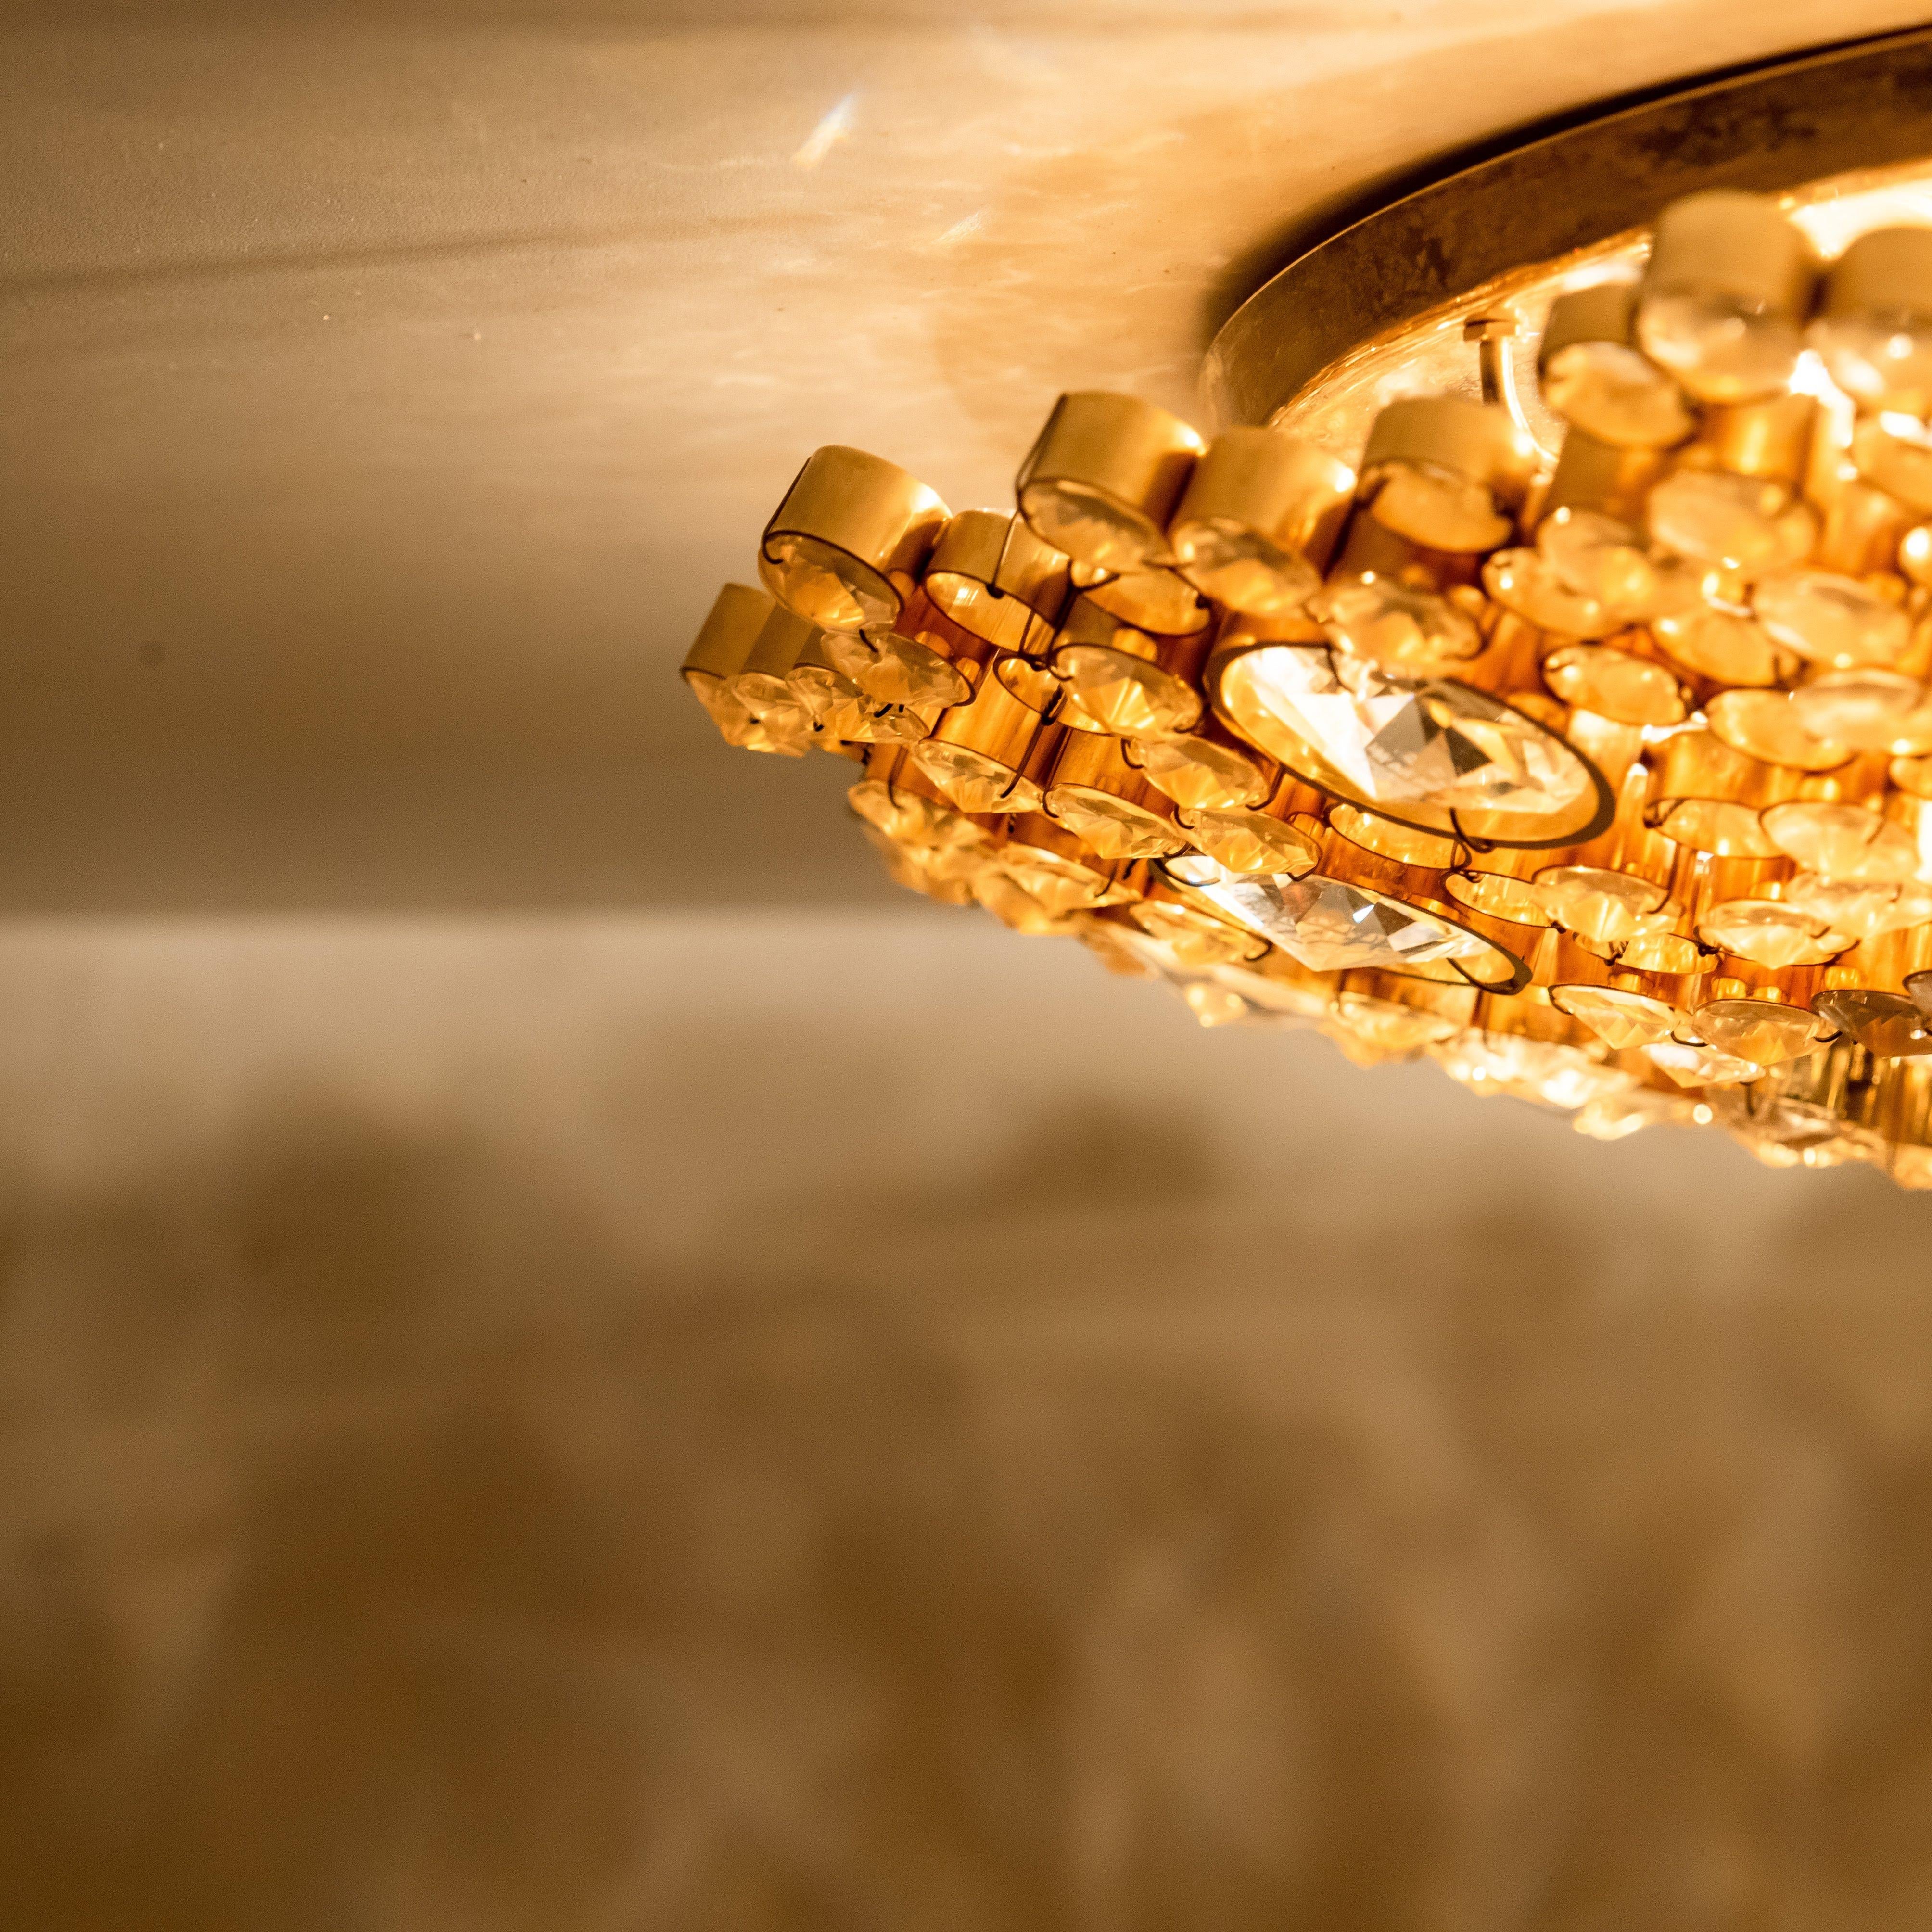 Gilt 1 of the 2 Gilded Brass and Crystal Glass Flushmount Light by Palwa, 1960s